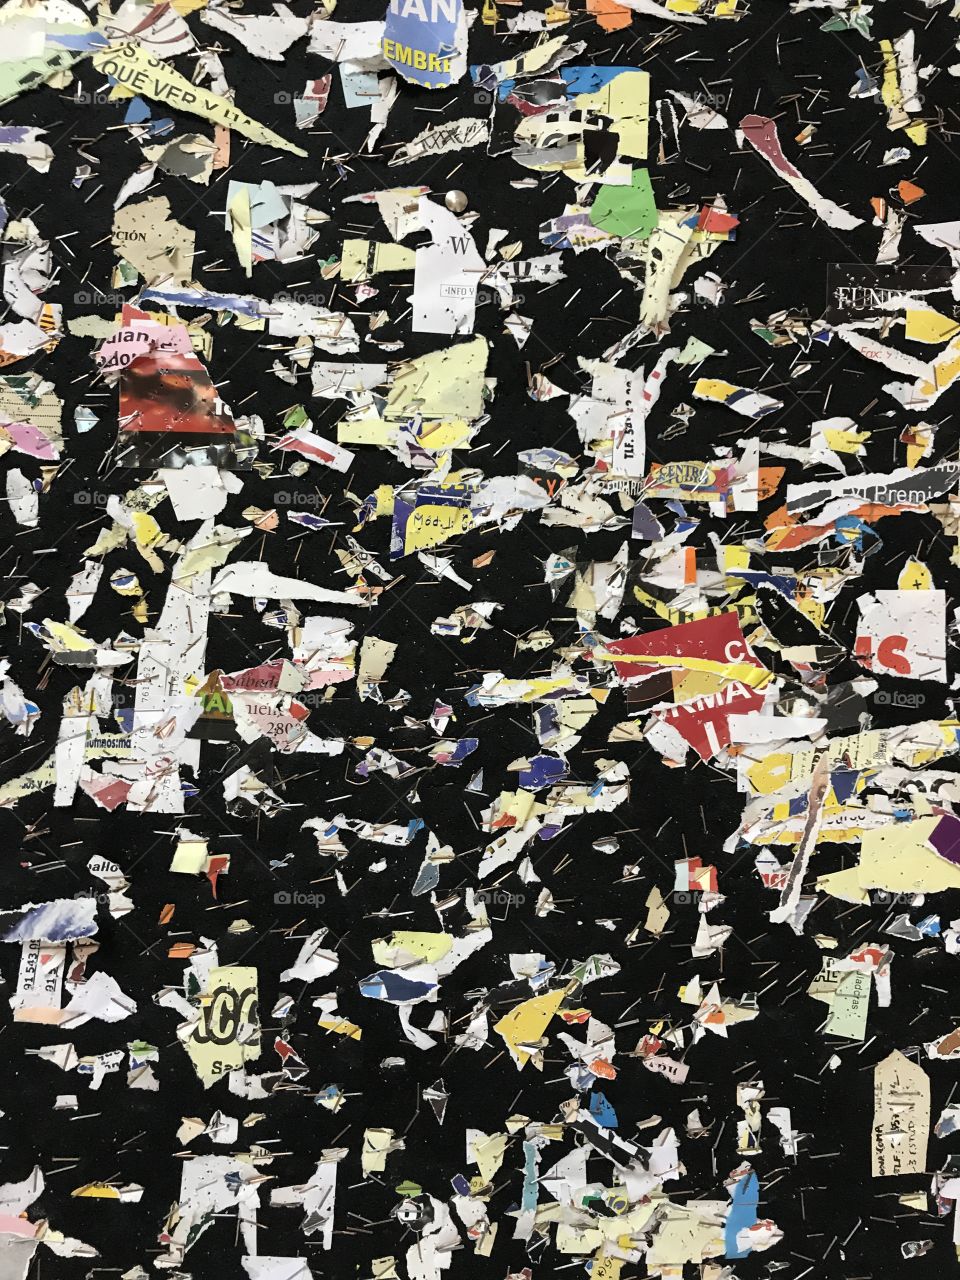 Paper chaos: what is left when the information becomes obsolete